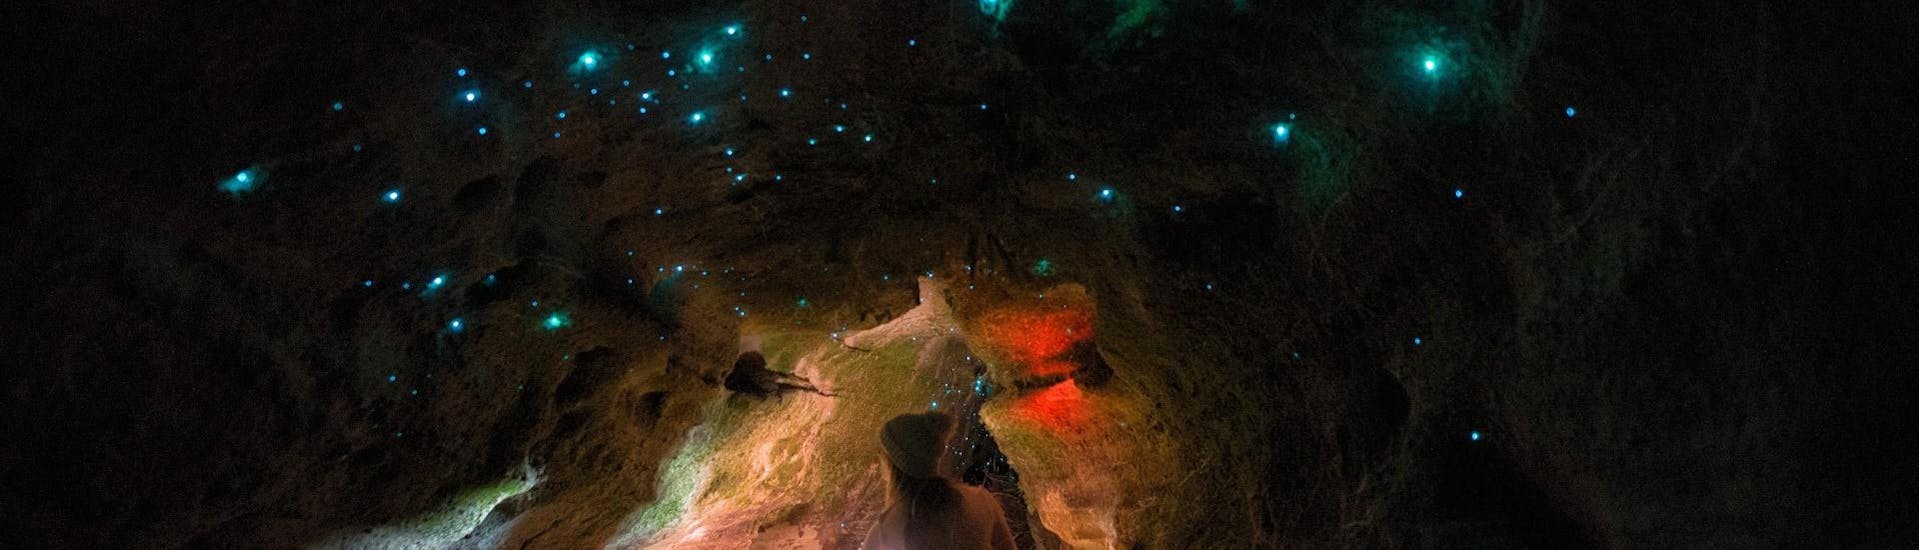 A spectacular view of a glow worm cave near Rotorua during a paddle board tour organized by Paddle Board Rotorua.